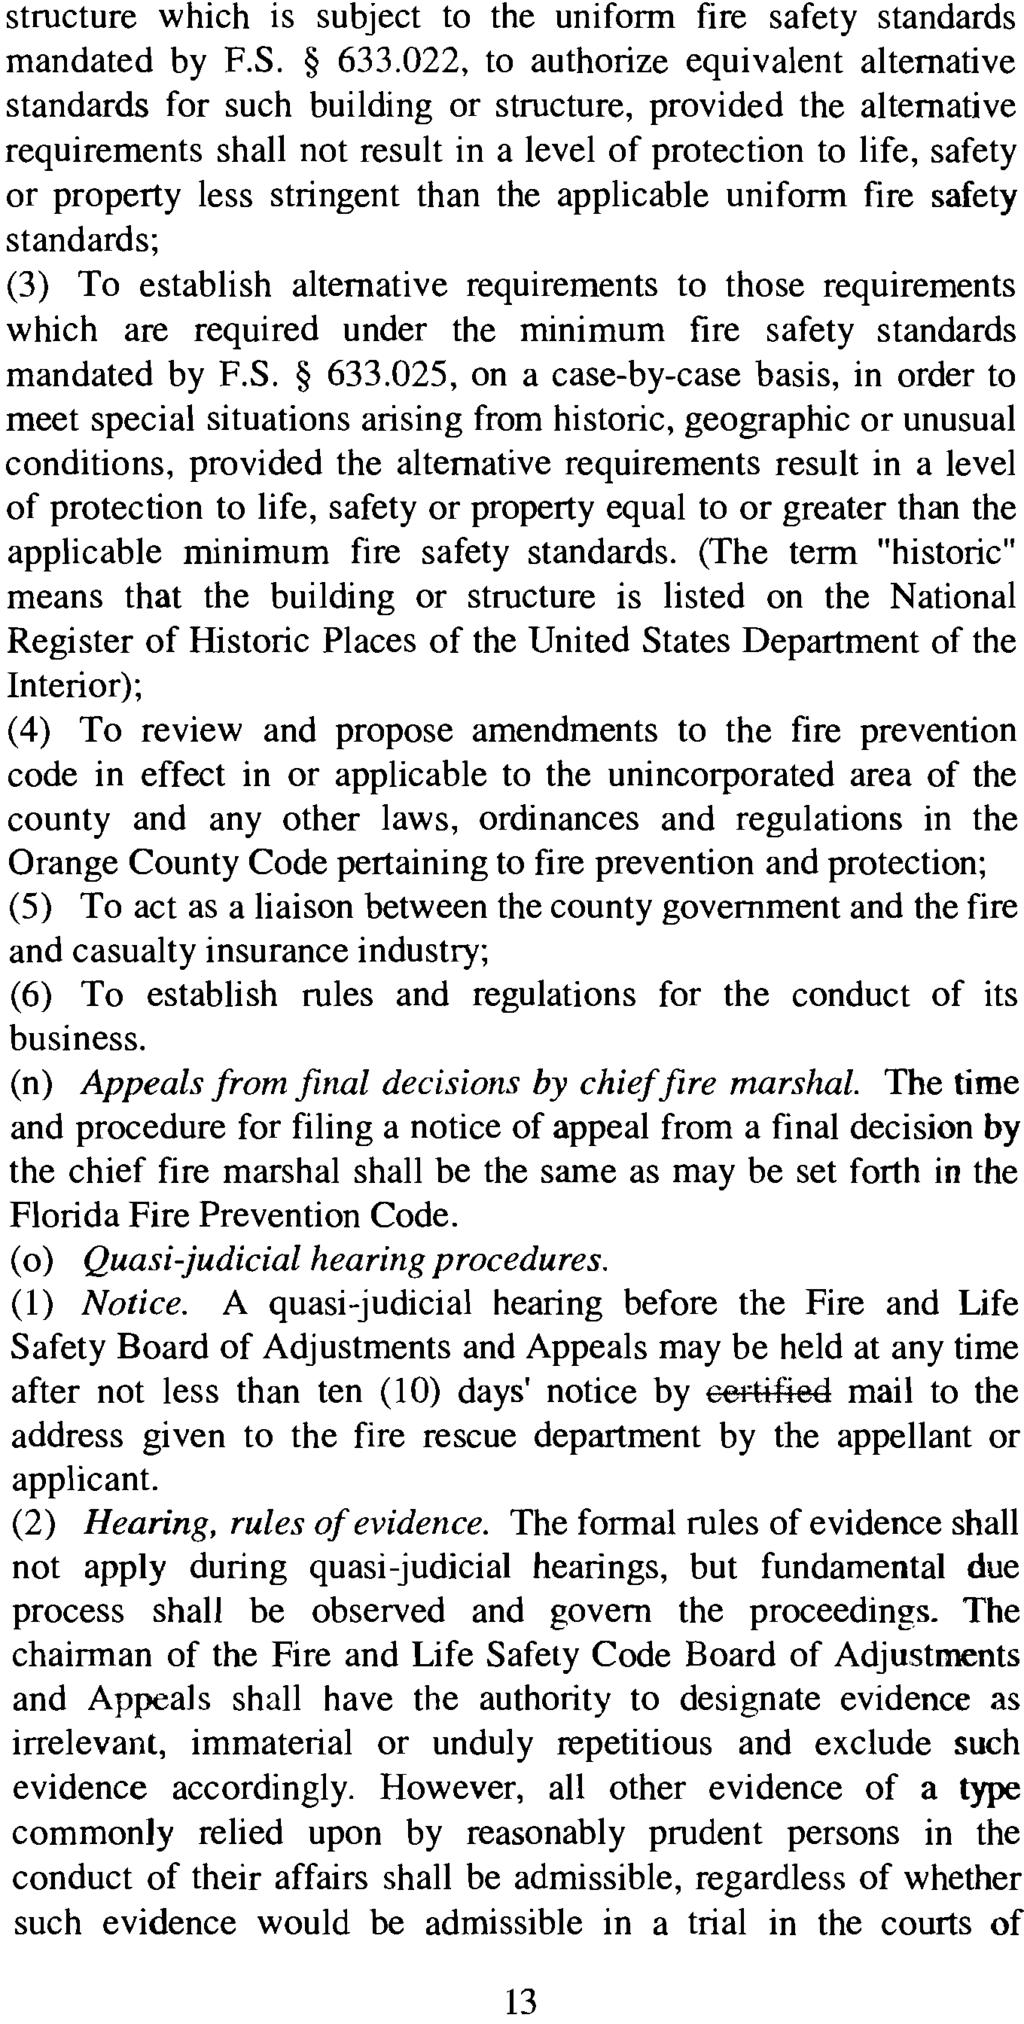 structure which is subject to the uniform fire safety standards mandated by F.S. 633.